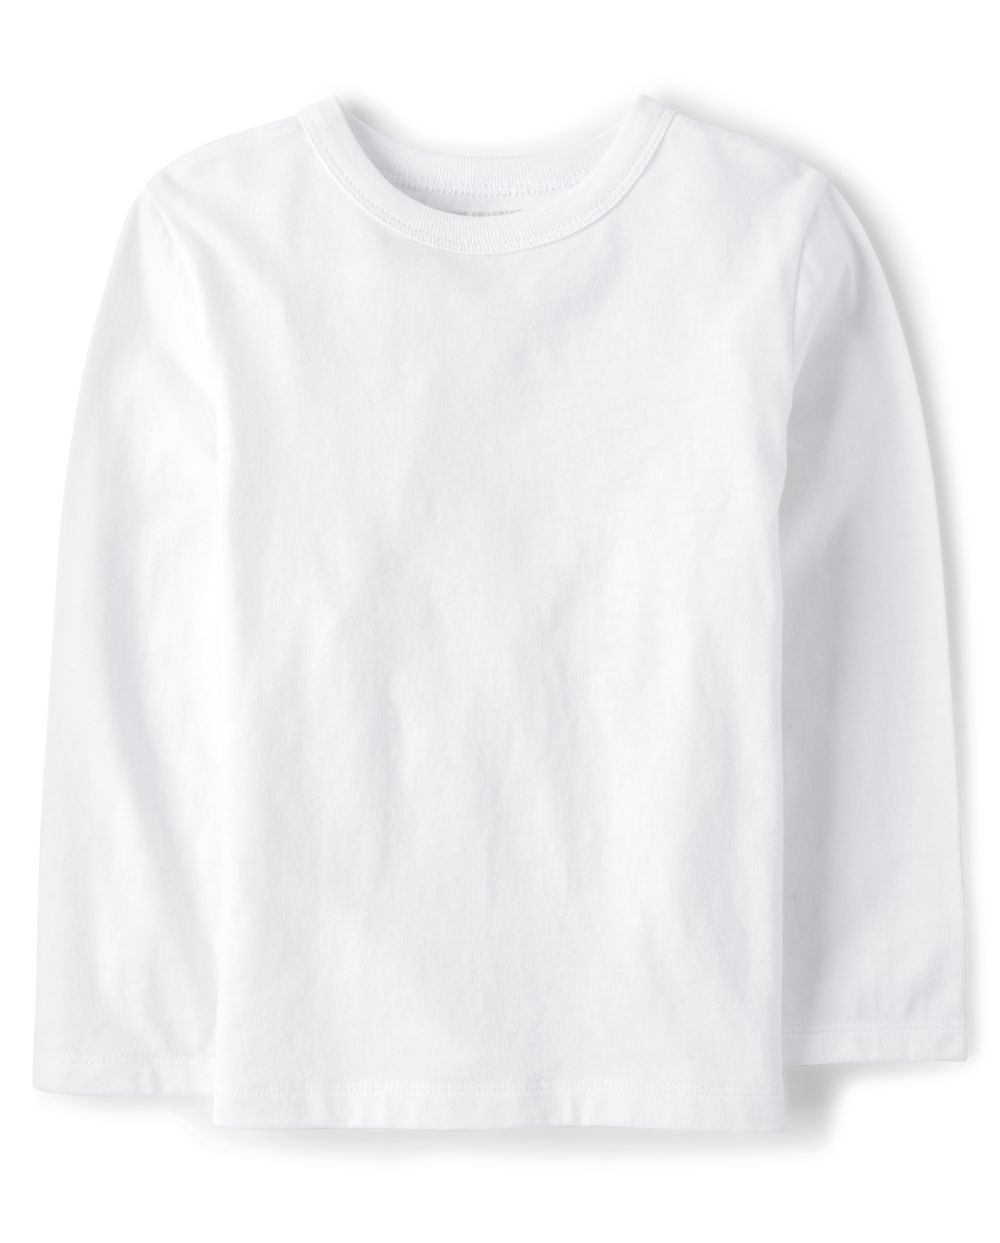 

s Baby And Toddler Boys Uniform Basic Layering Tee - White T-Shirt - The Children's Place